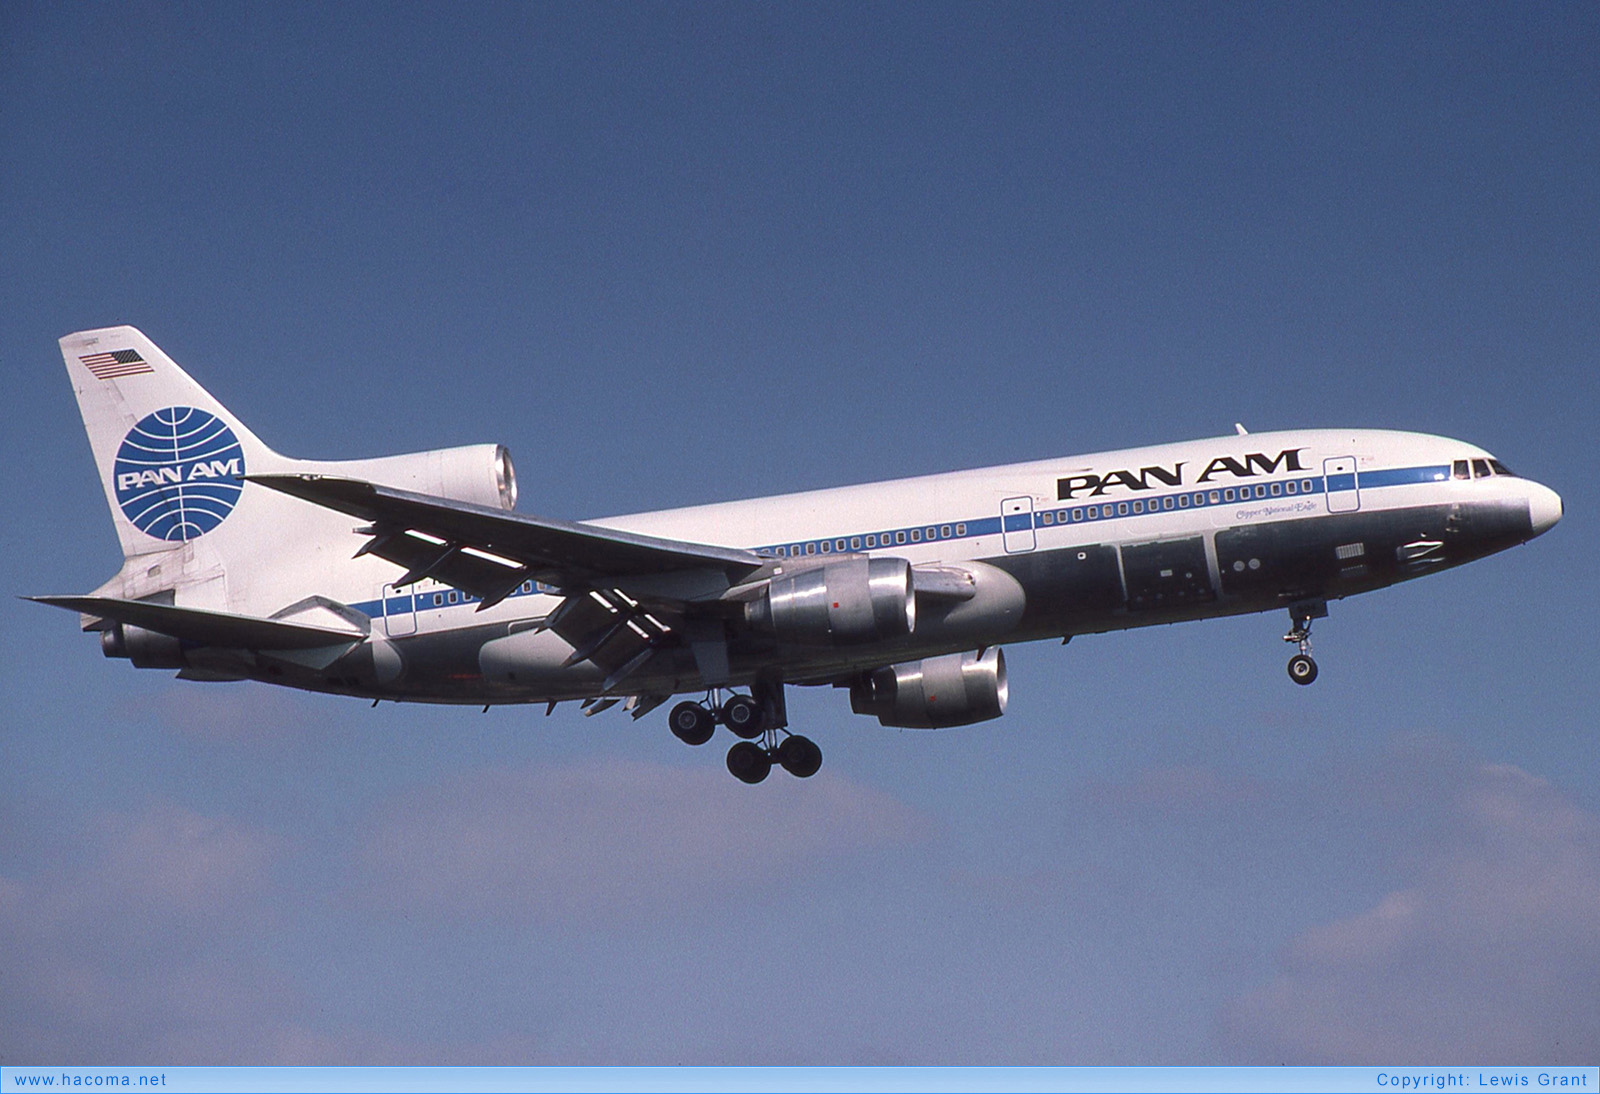 Photo of N504PA - Pan Am Clipper National Eagle - Gatwick Airport - Apr 18, 1981